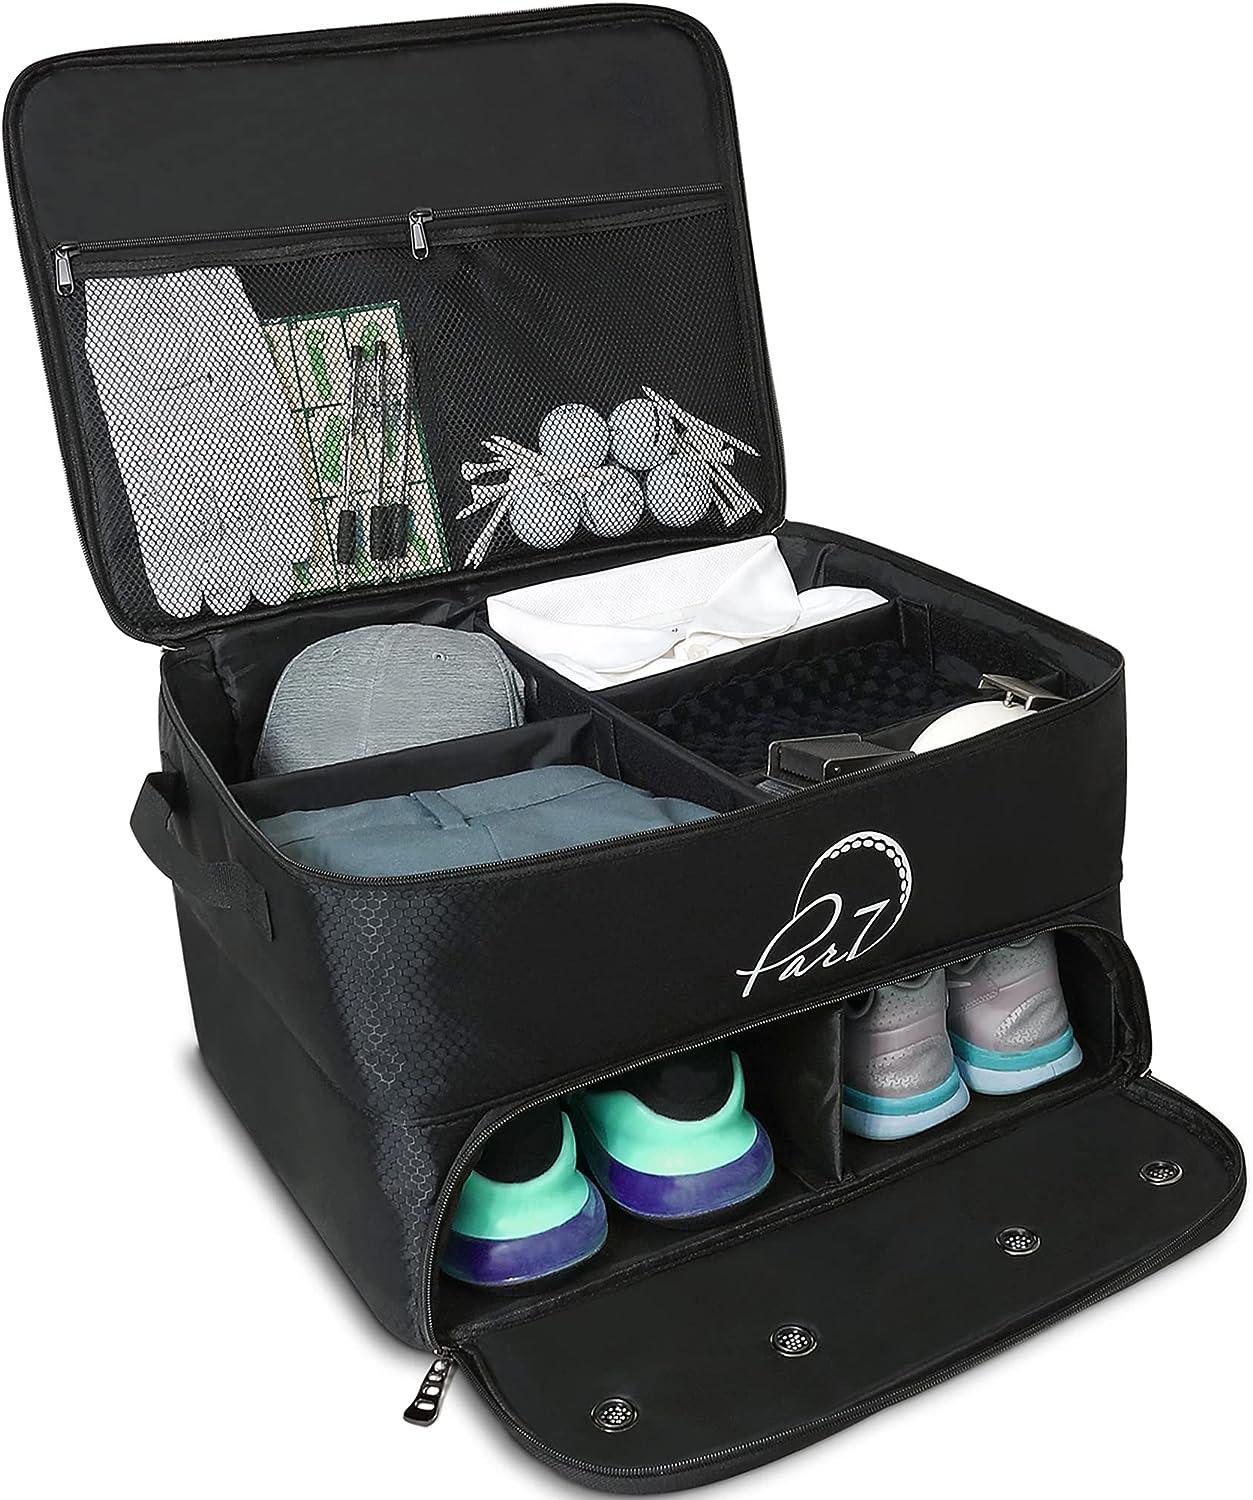 Par7 Golf Trunk Organizer - 2 Pair Golf Shoes and Accessories Storage -  Double Layer Storage Locker - Waterproof and Durable Material - Foldable  and Lightweight - Gift Idea for Golfers